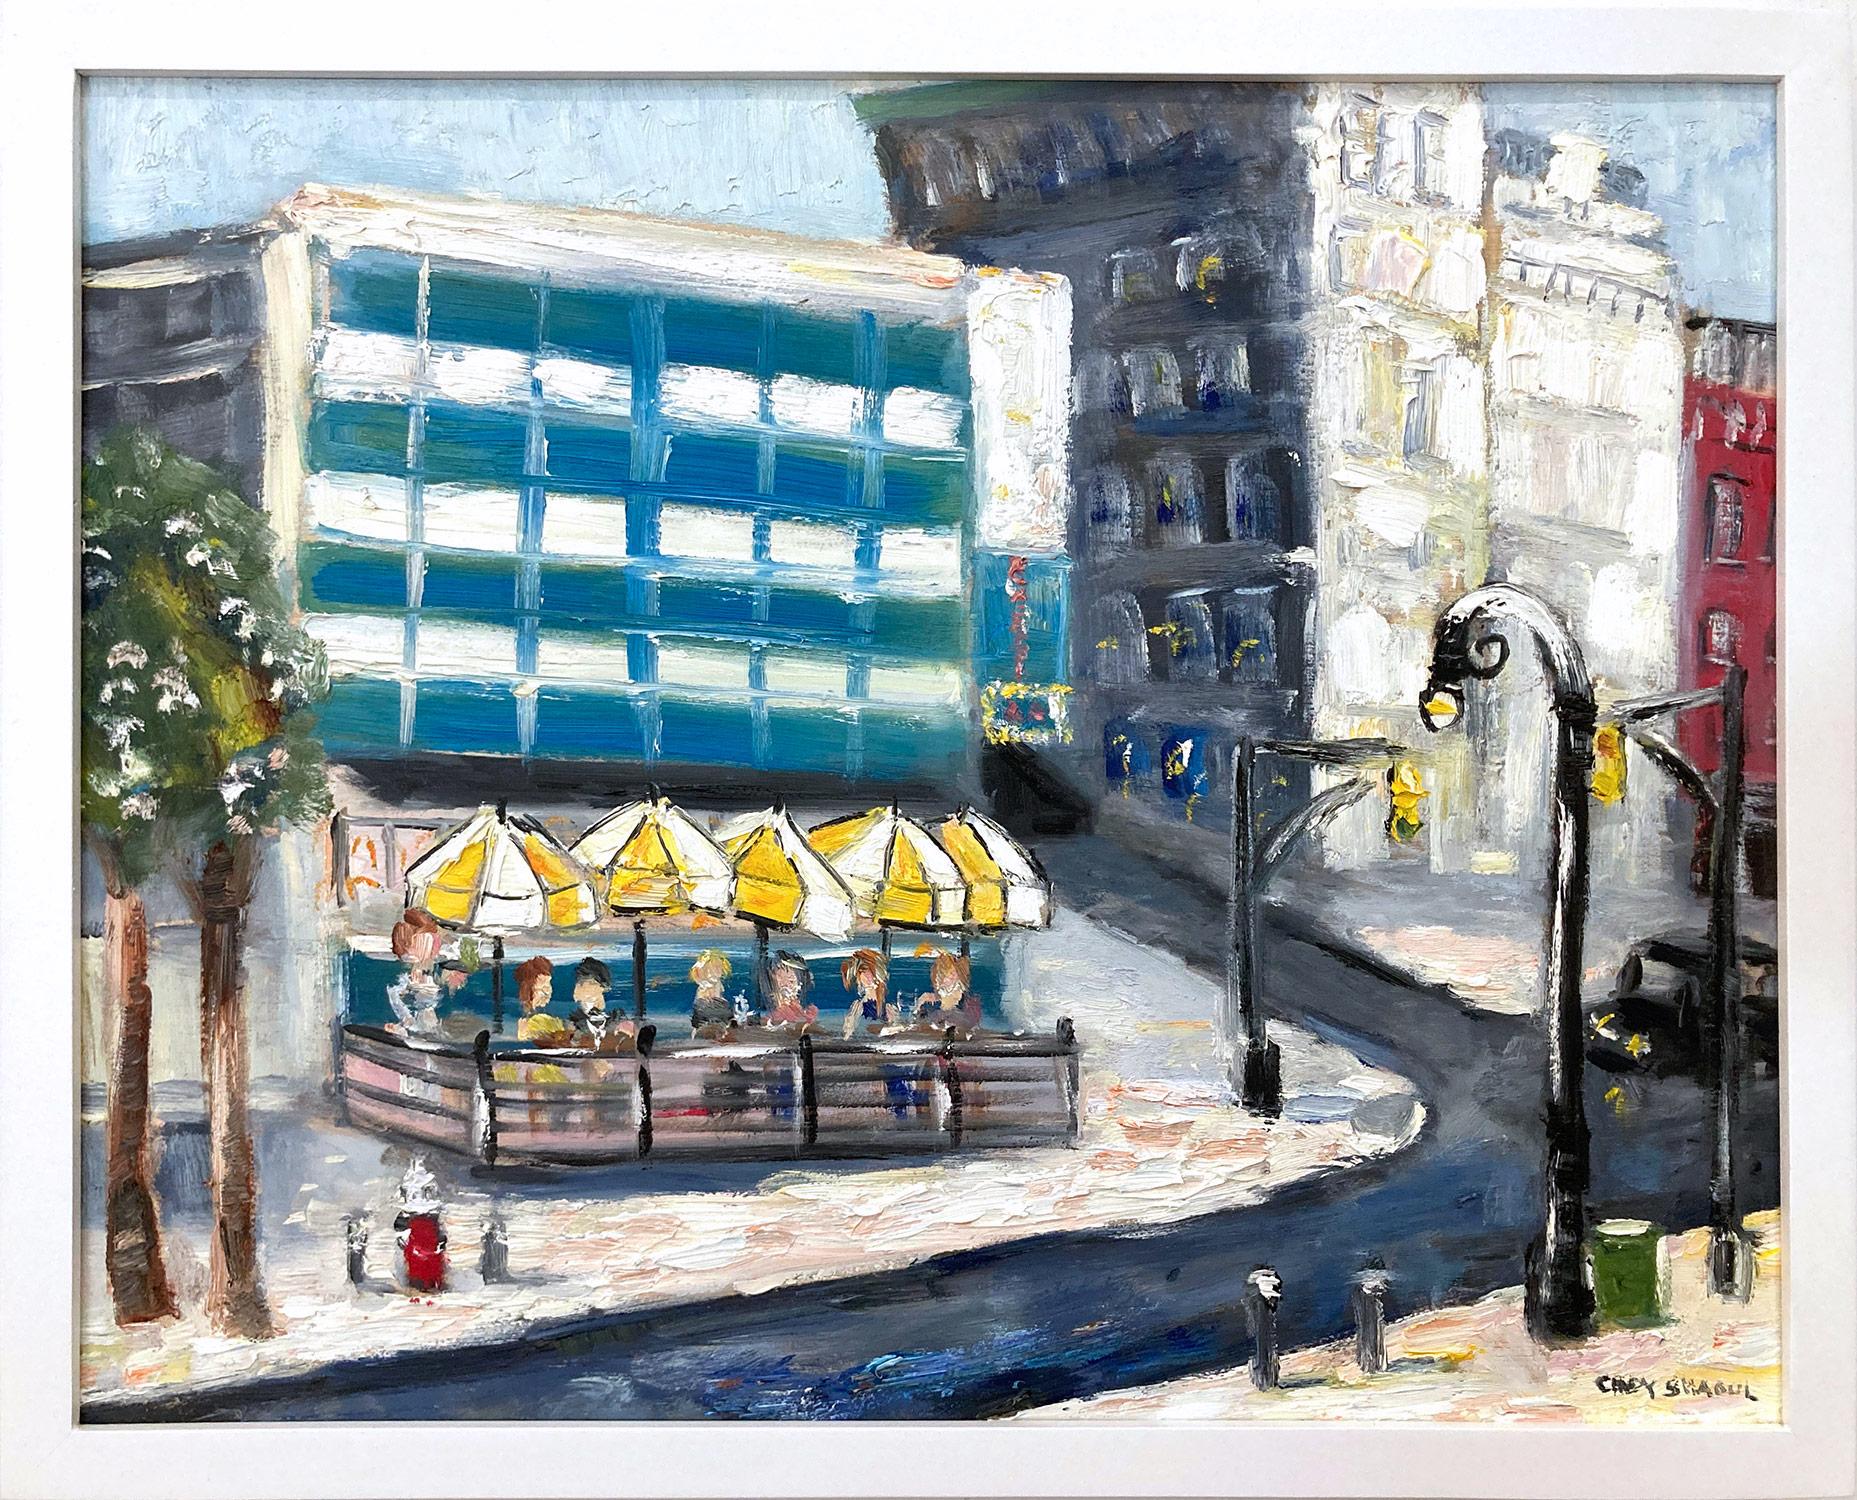 Cindy Shaoul Figurative Painting - "Coffee Shop" Impressionistic Oil Painting of Memorable Union Square Restaurant